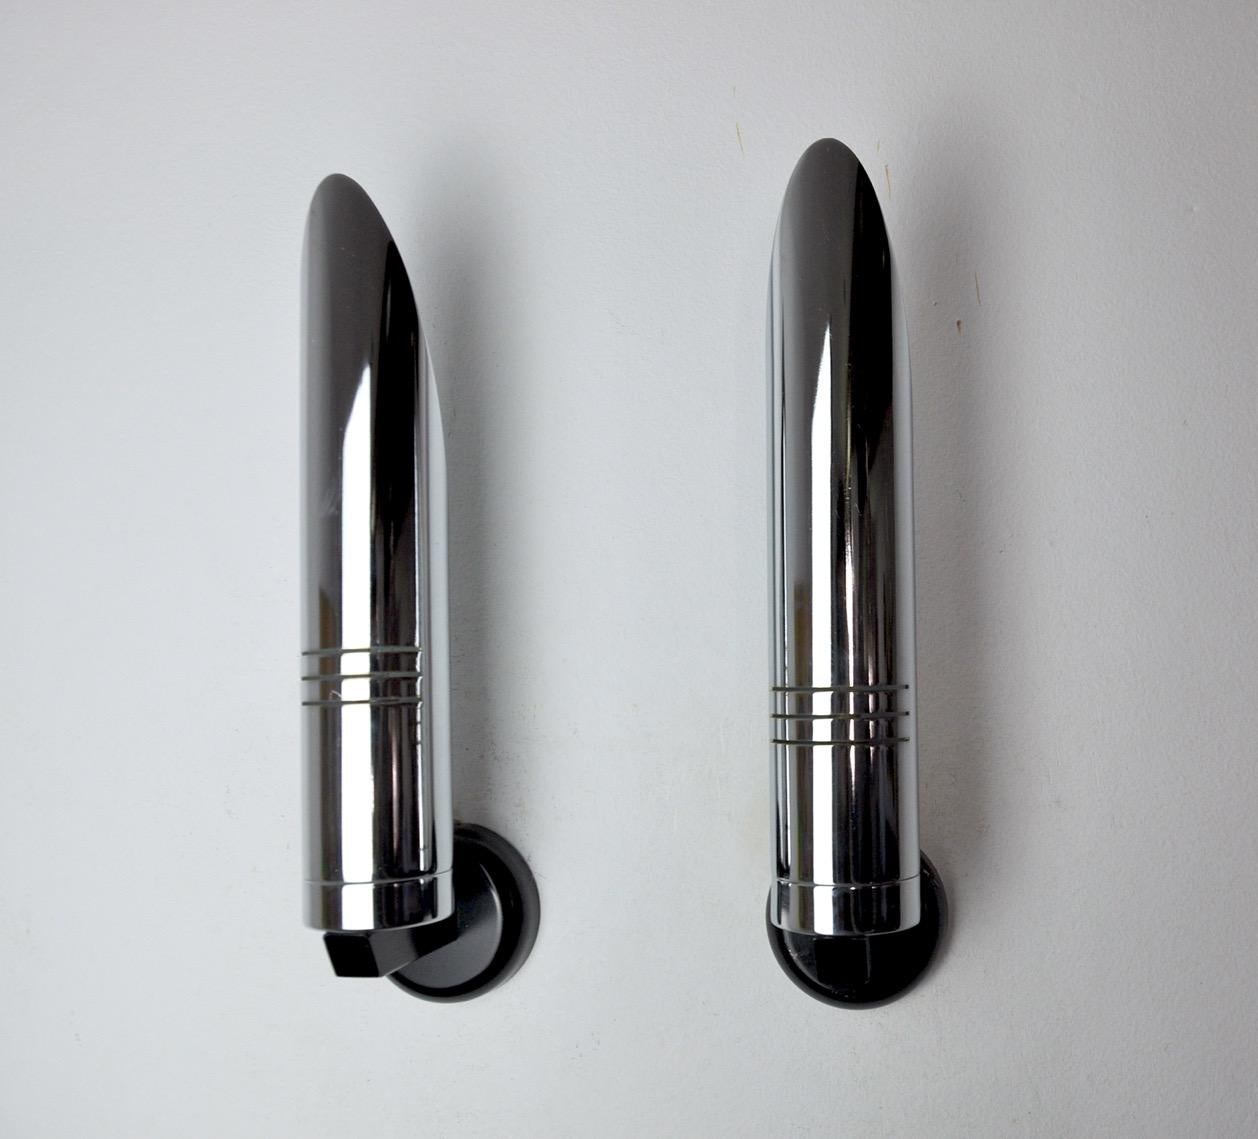 Hollywood Regency Pair of RAAK Wall Lamps, Space-Age Chrome Design, Germany, 1970 For Sale